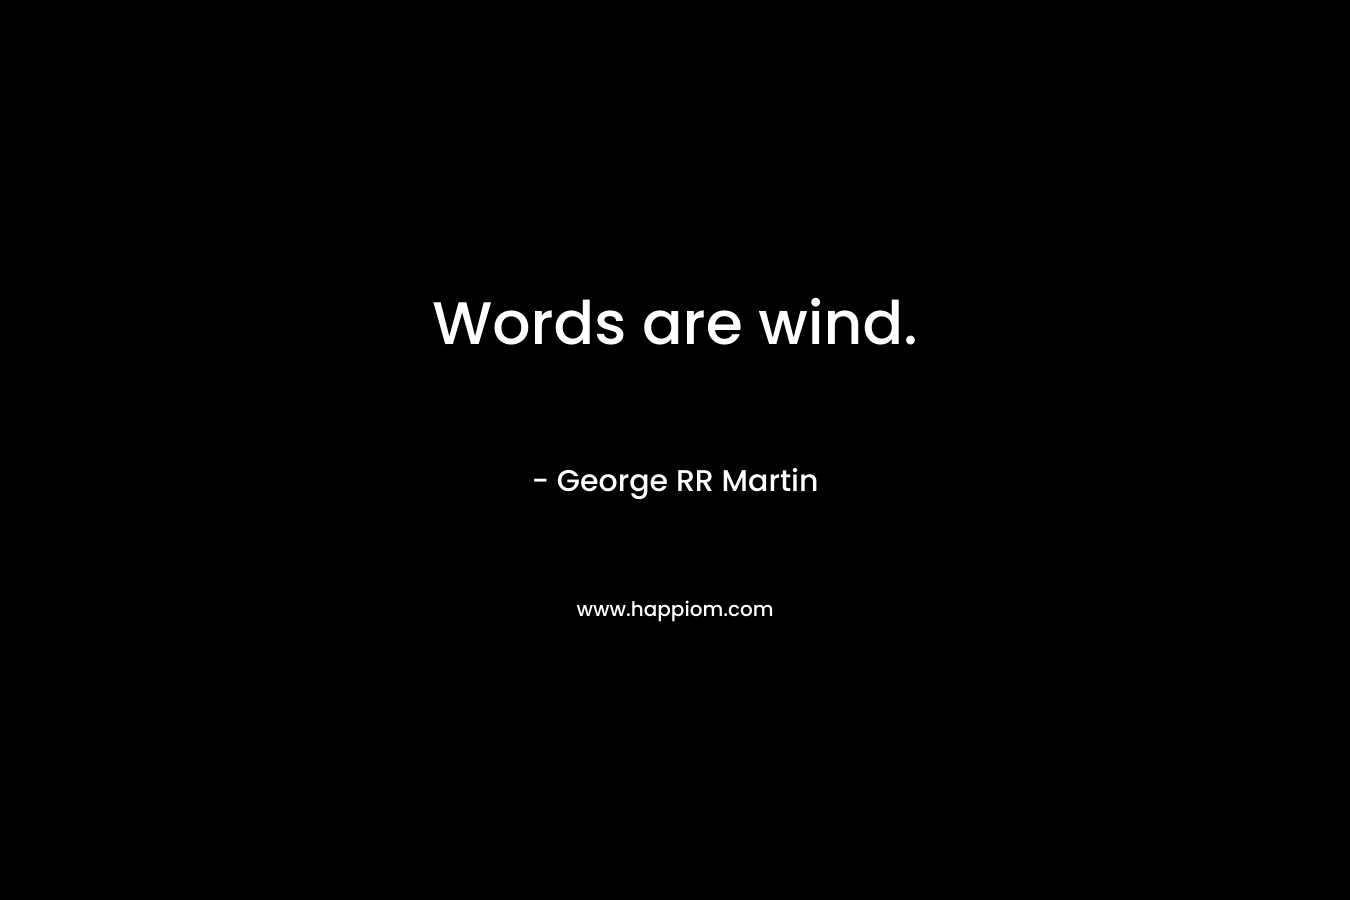 Words are wind.